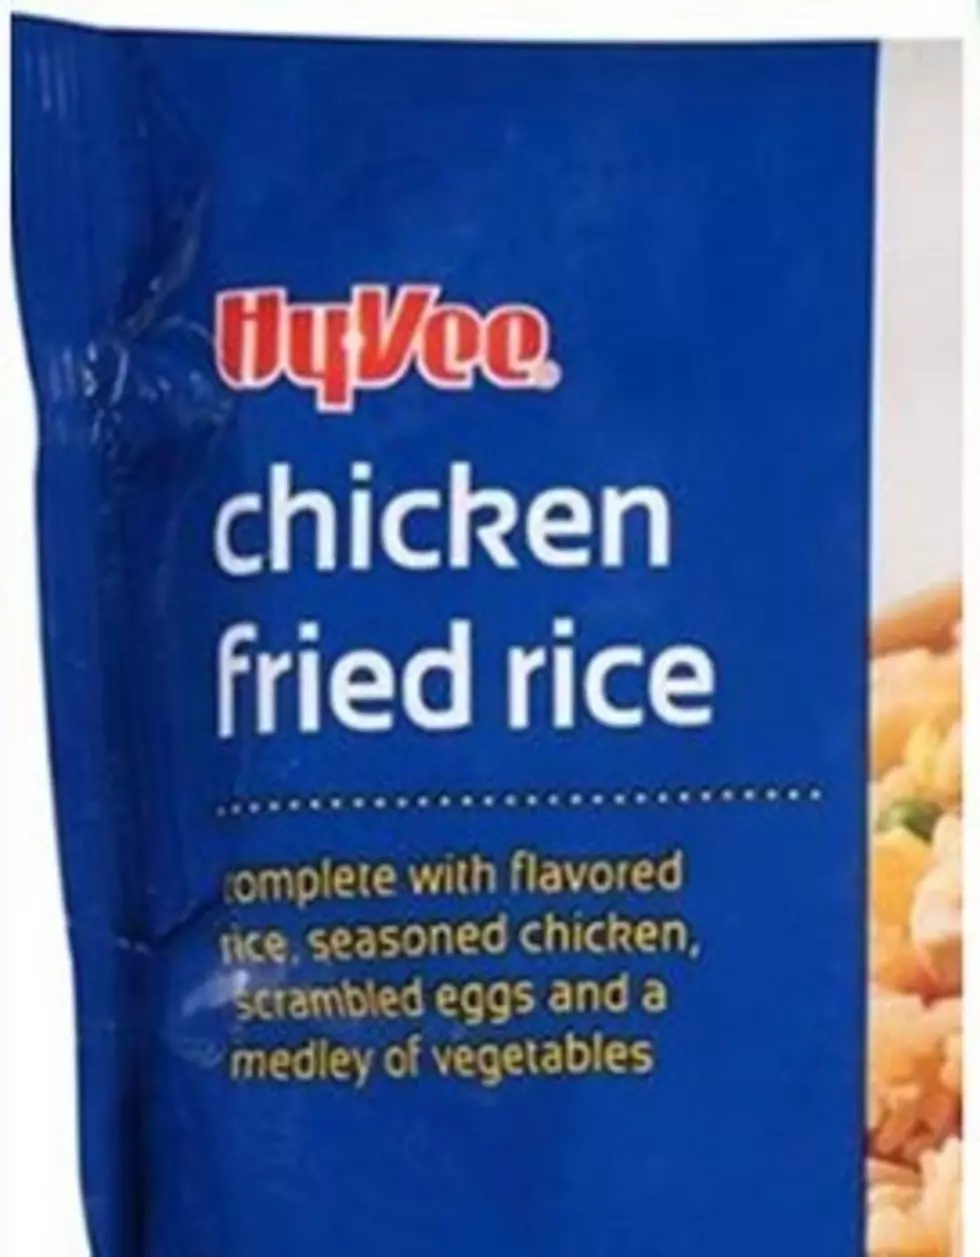 Hy-Vee Recalls Frozen Products Due to Possible Health Risk